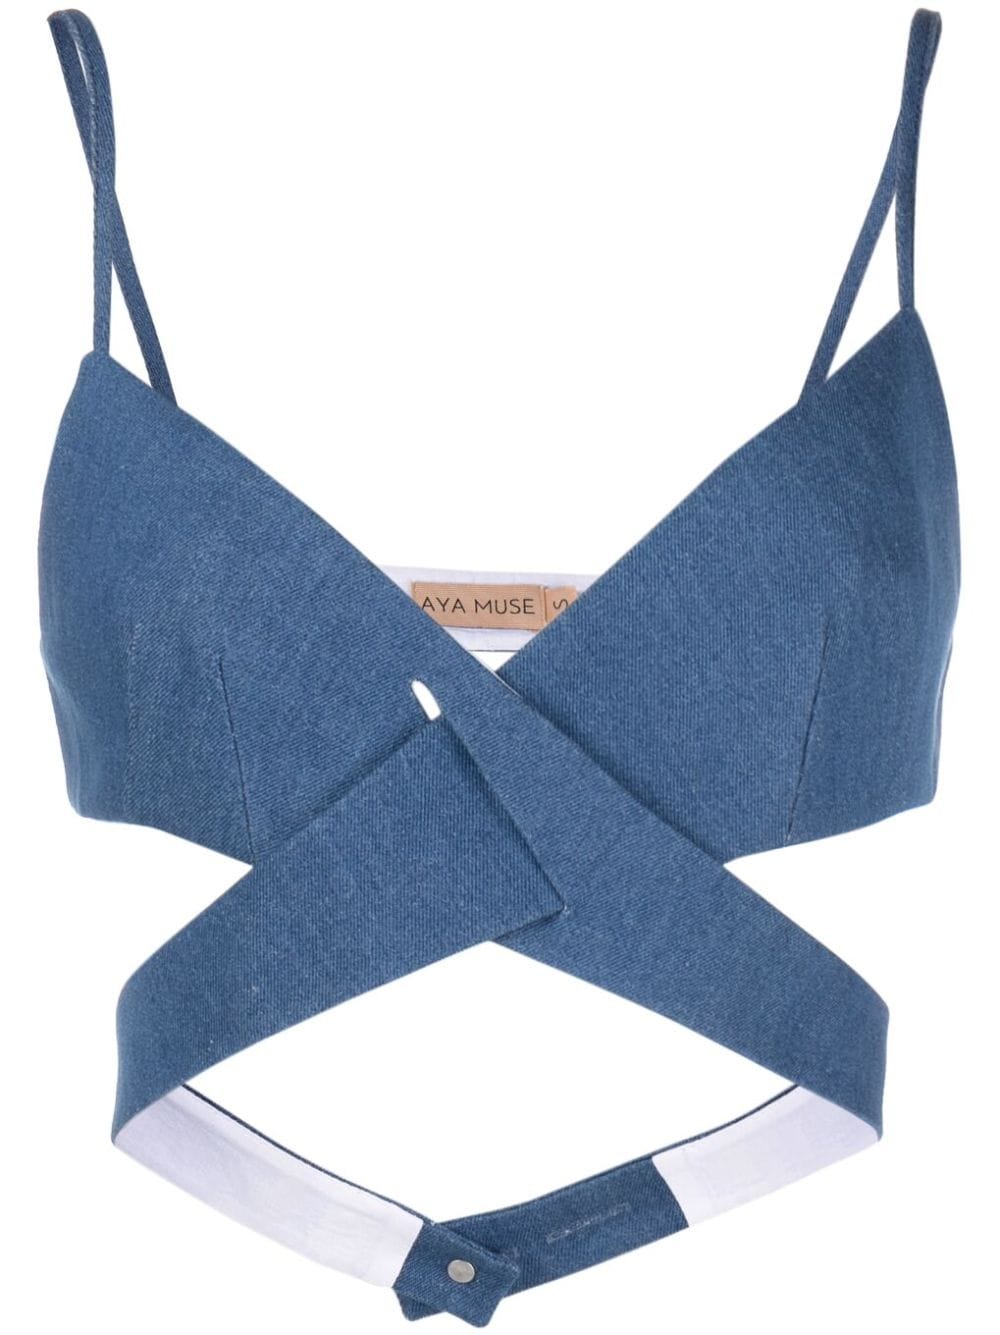 Aya Muse Blue Cross Front Denim Cropped Top